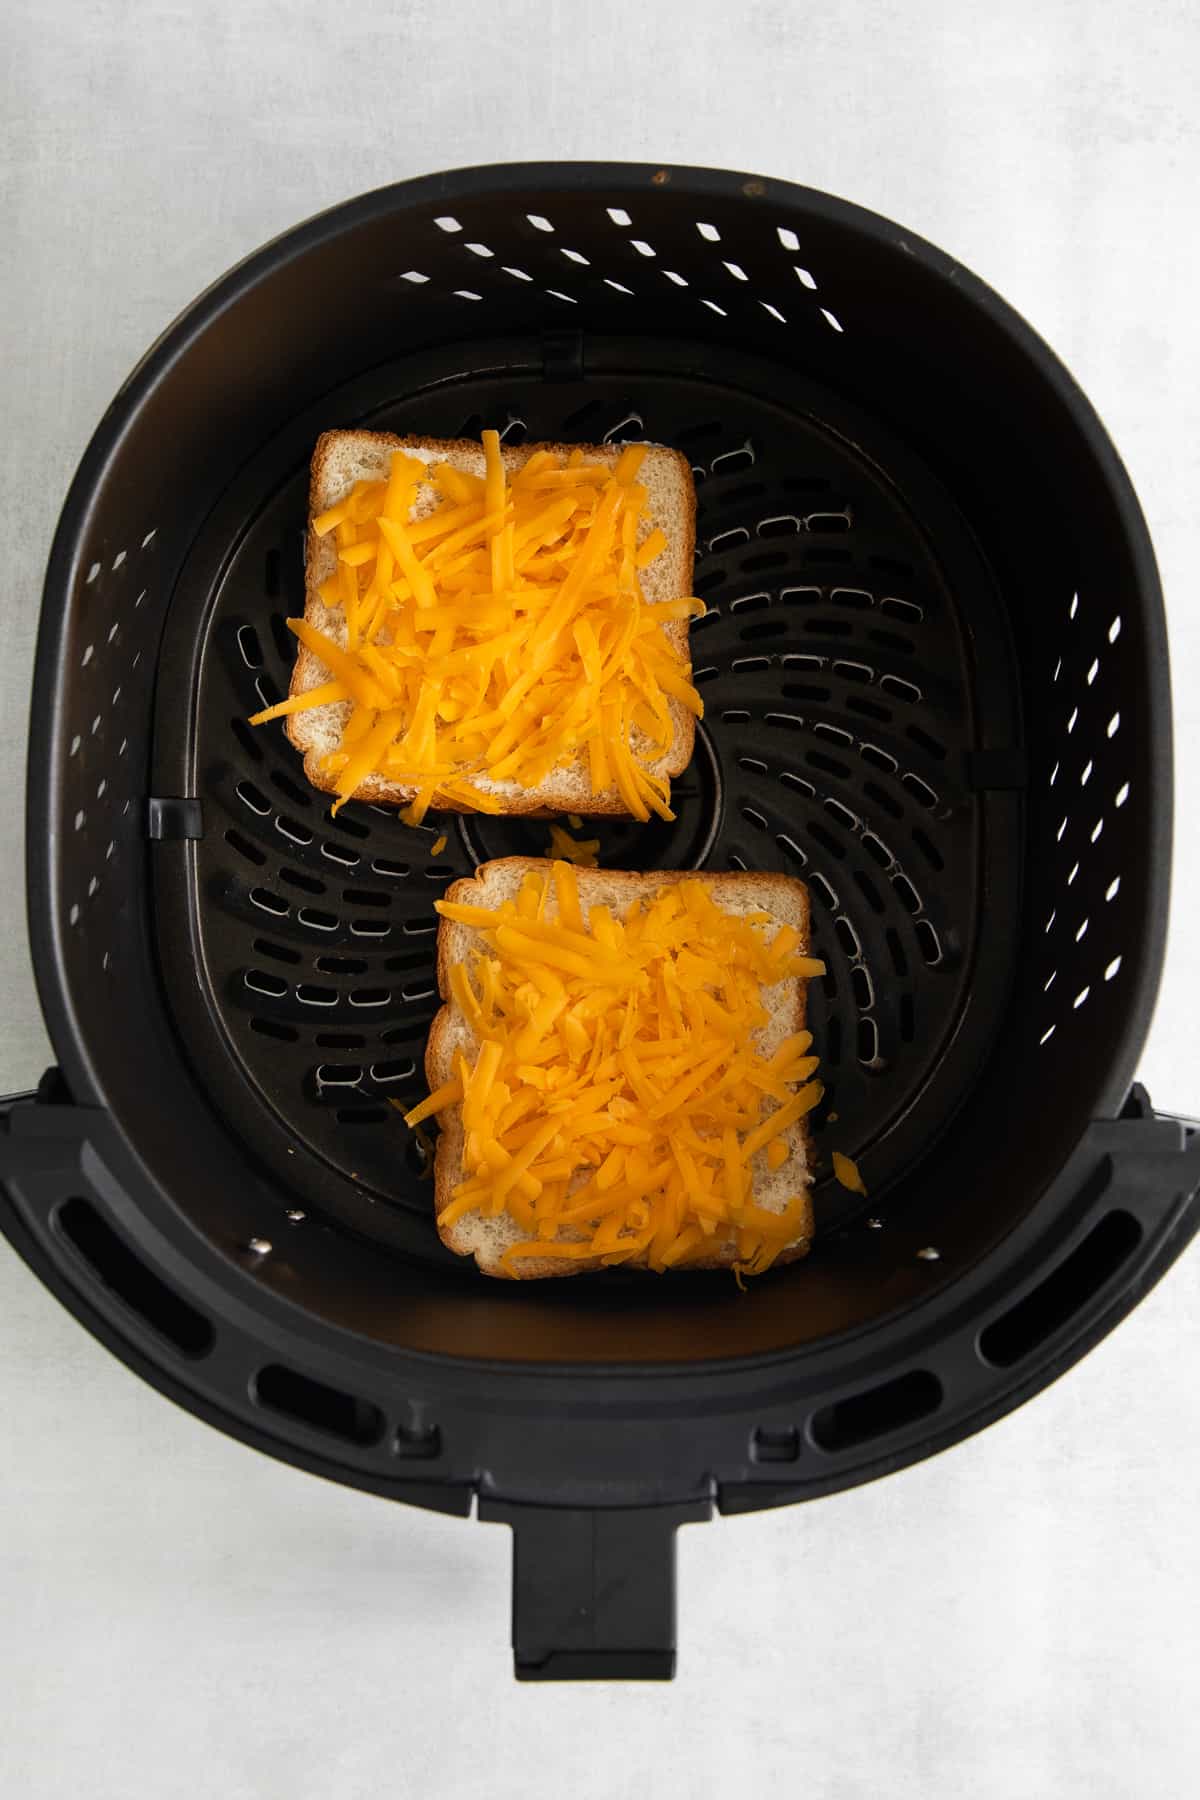 Cheese toast in the air fryer.